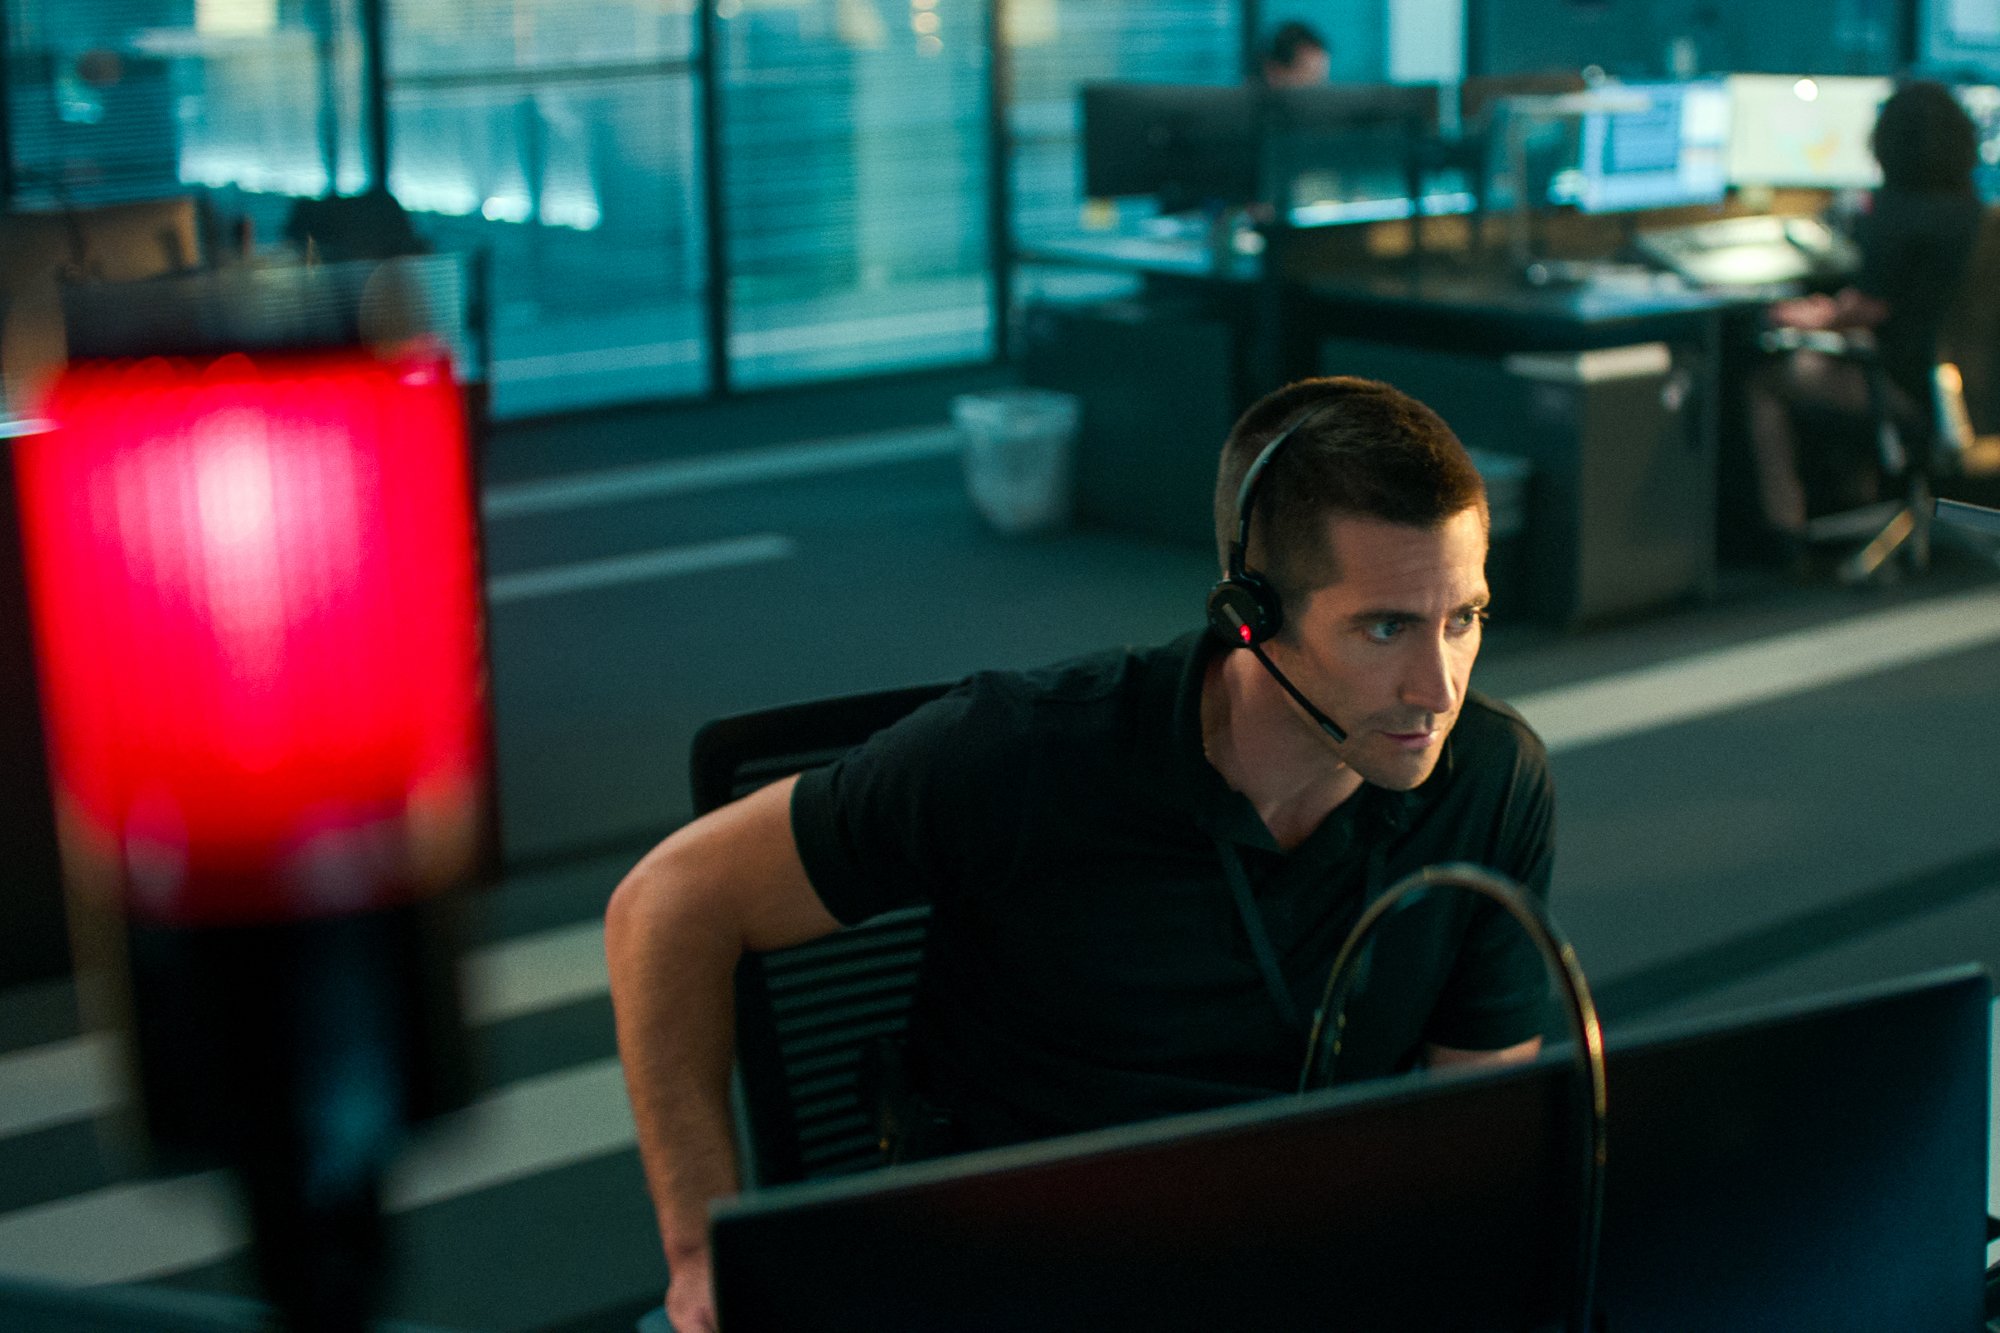 Netflix's 'The Guilty' actor Jake Gyllenhaal on the computer with a red light on